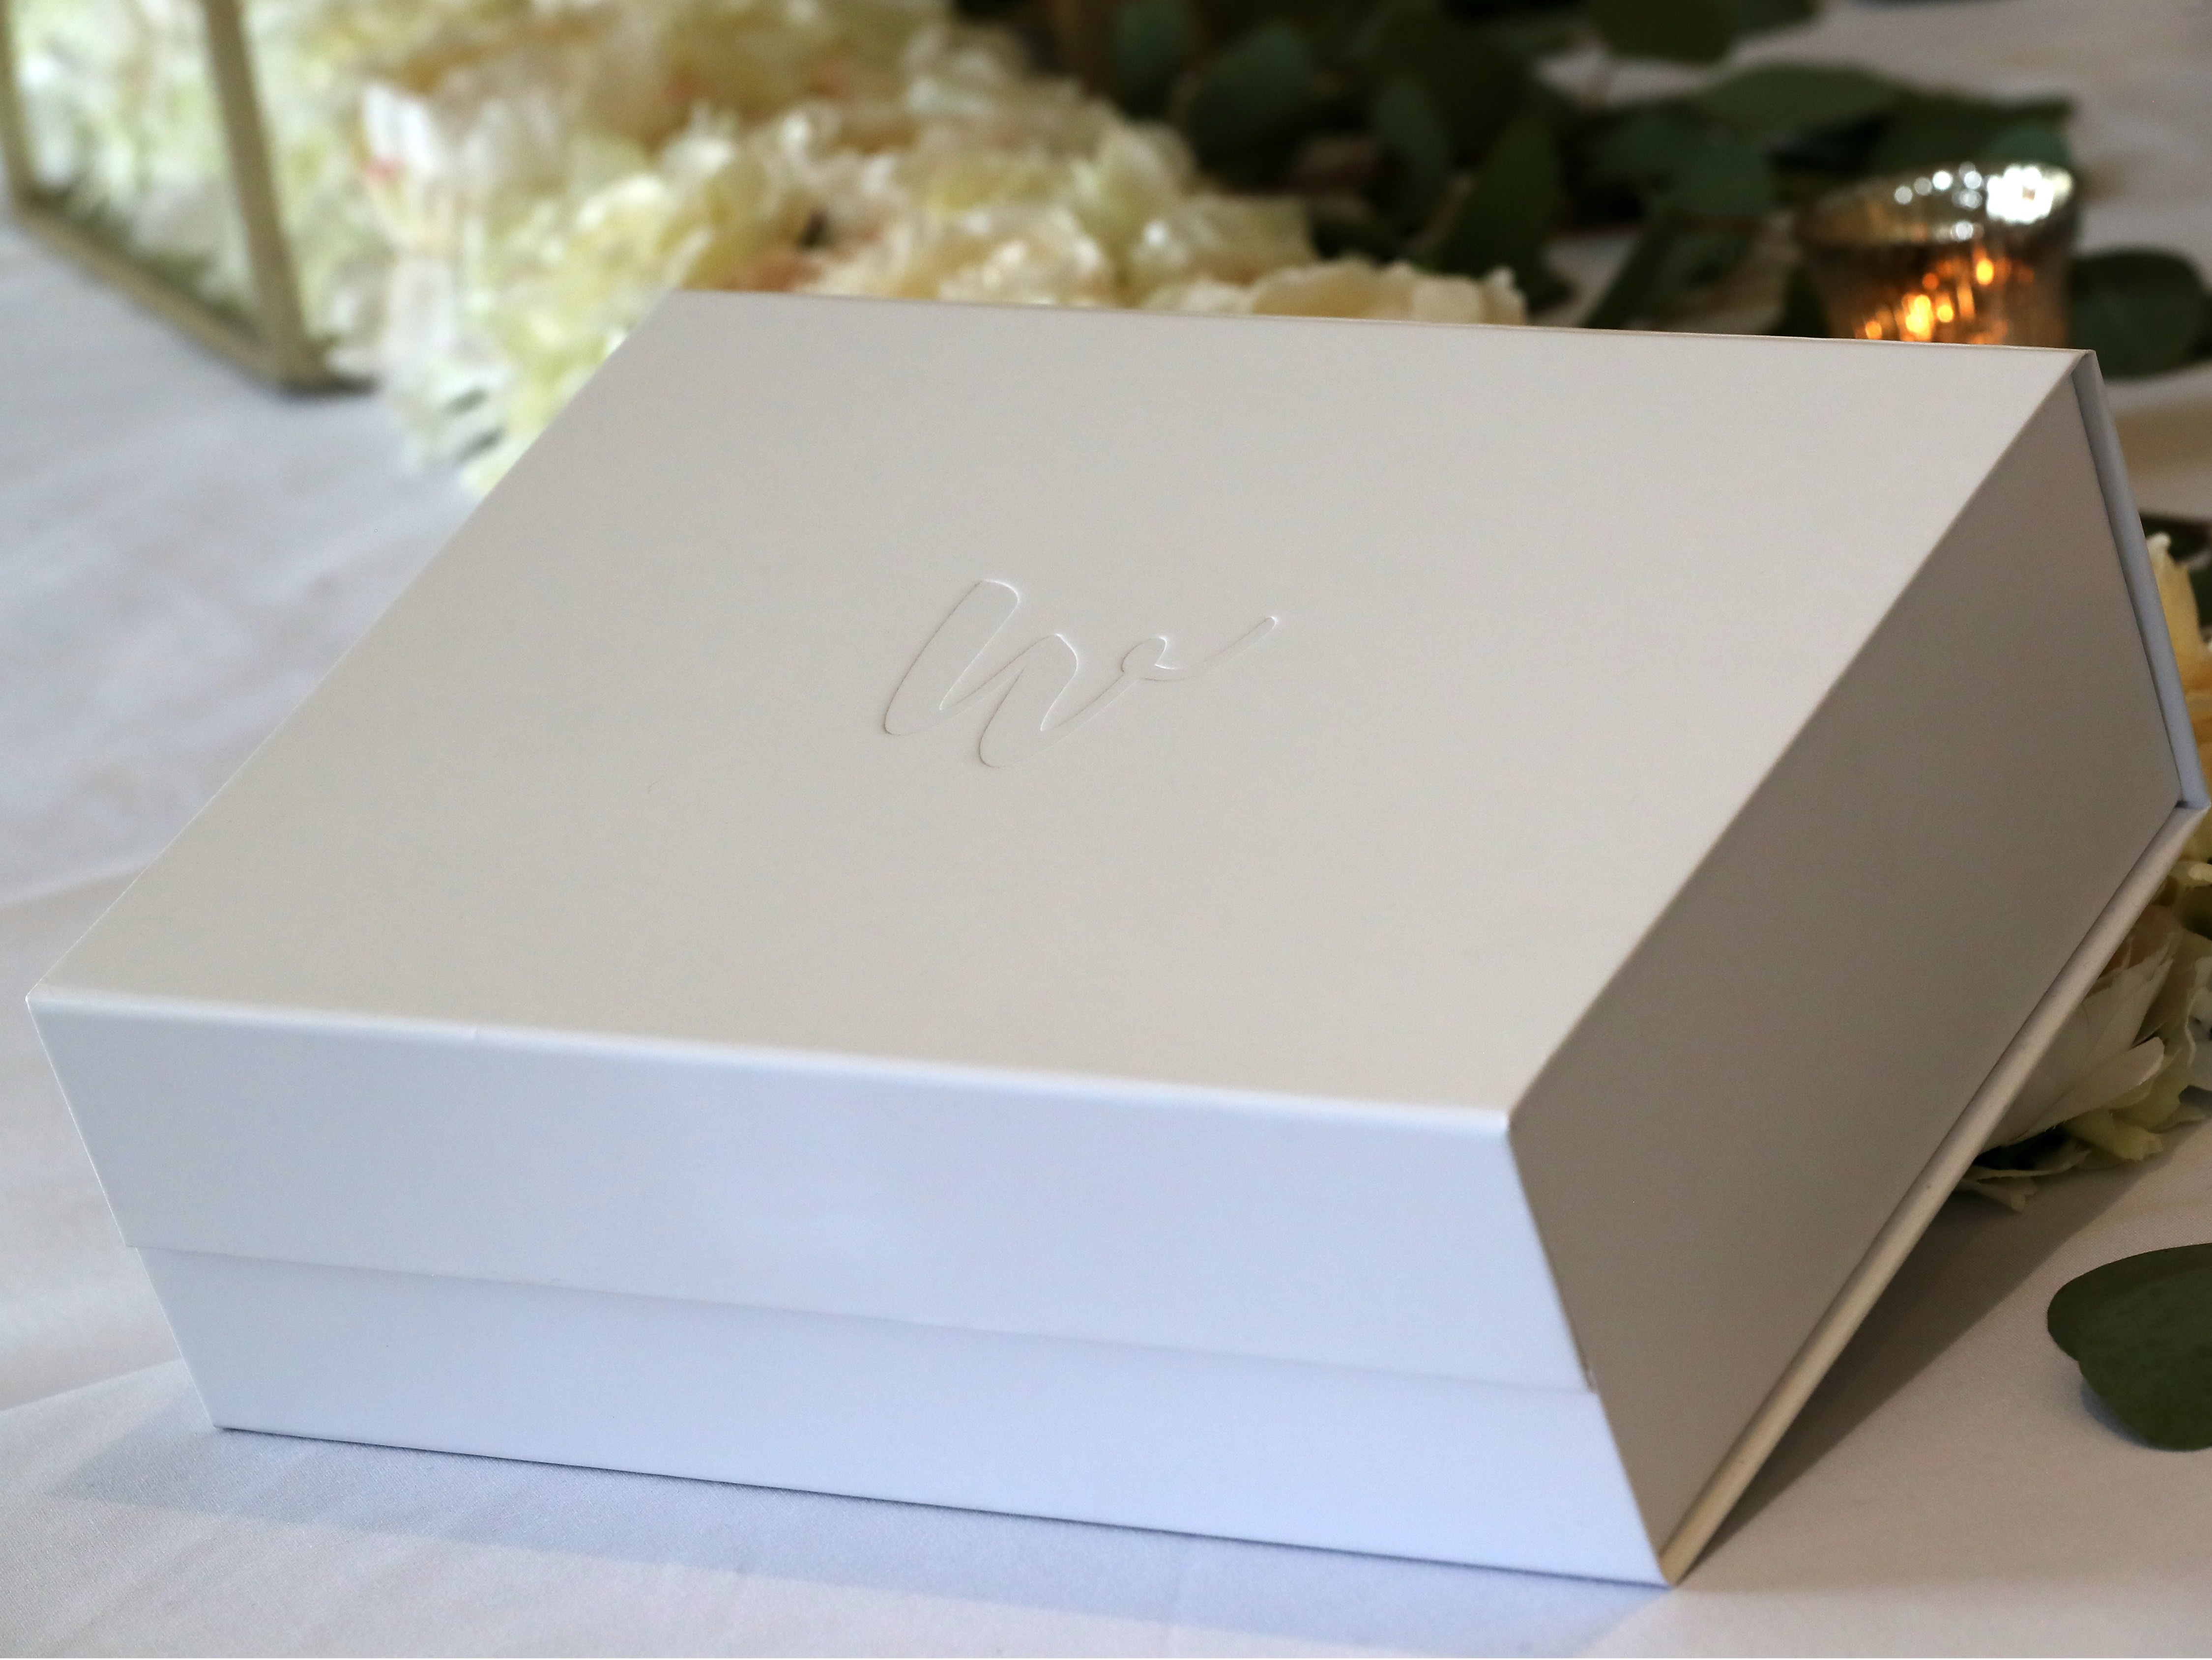 Personalised memories box for your wedding cards, repurpose wedding cards